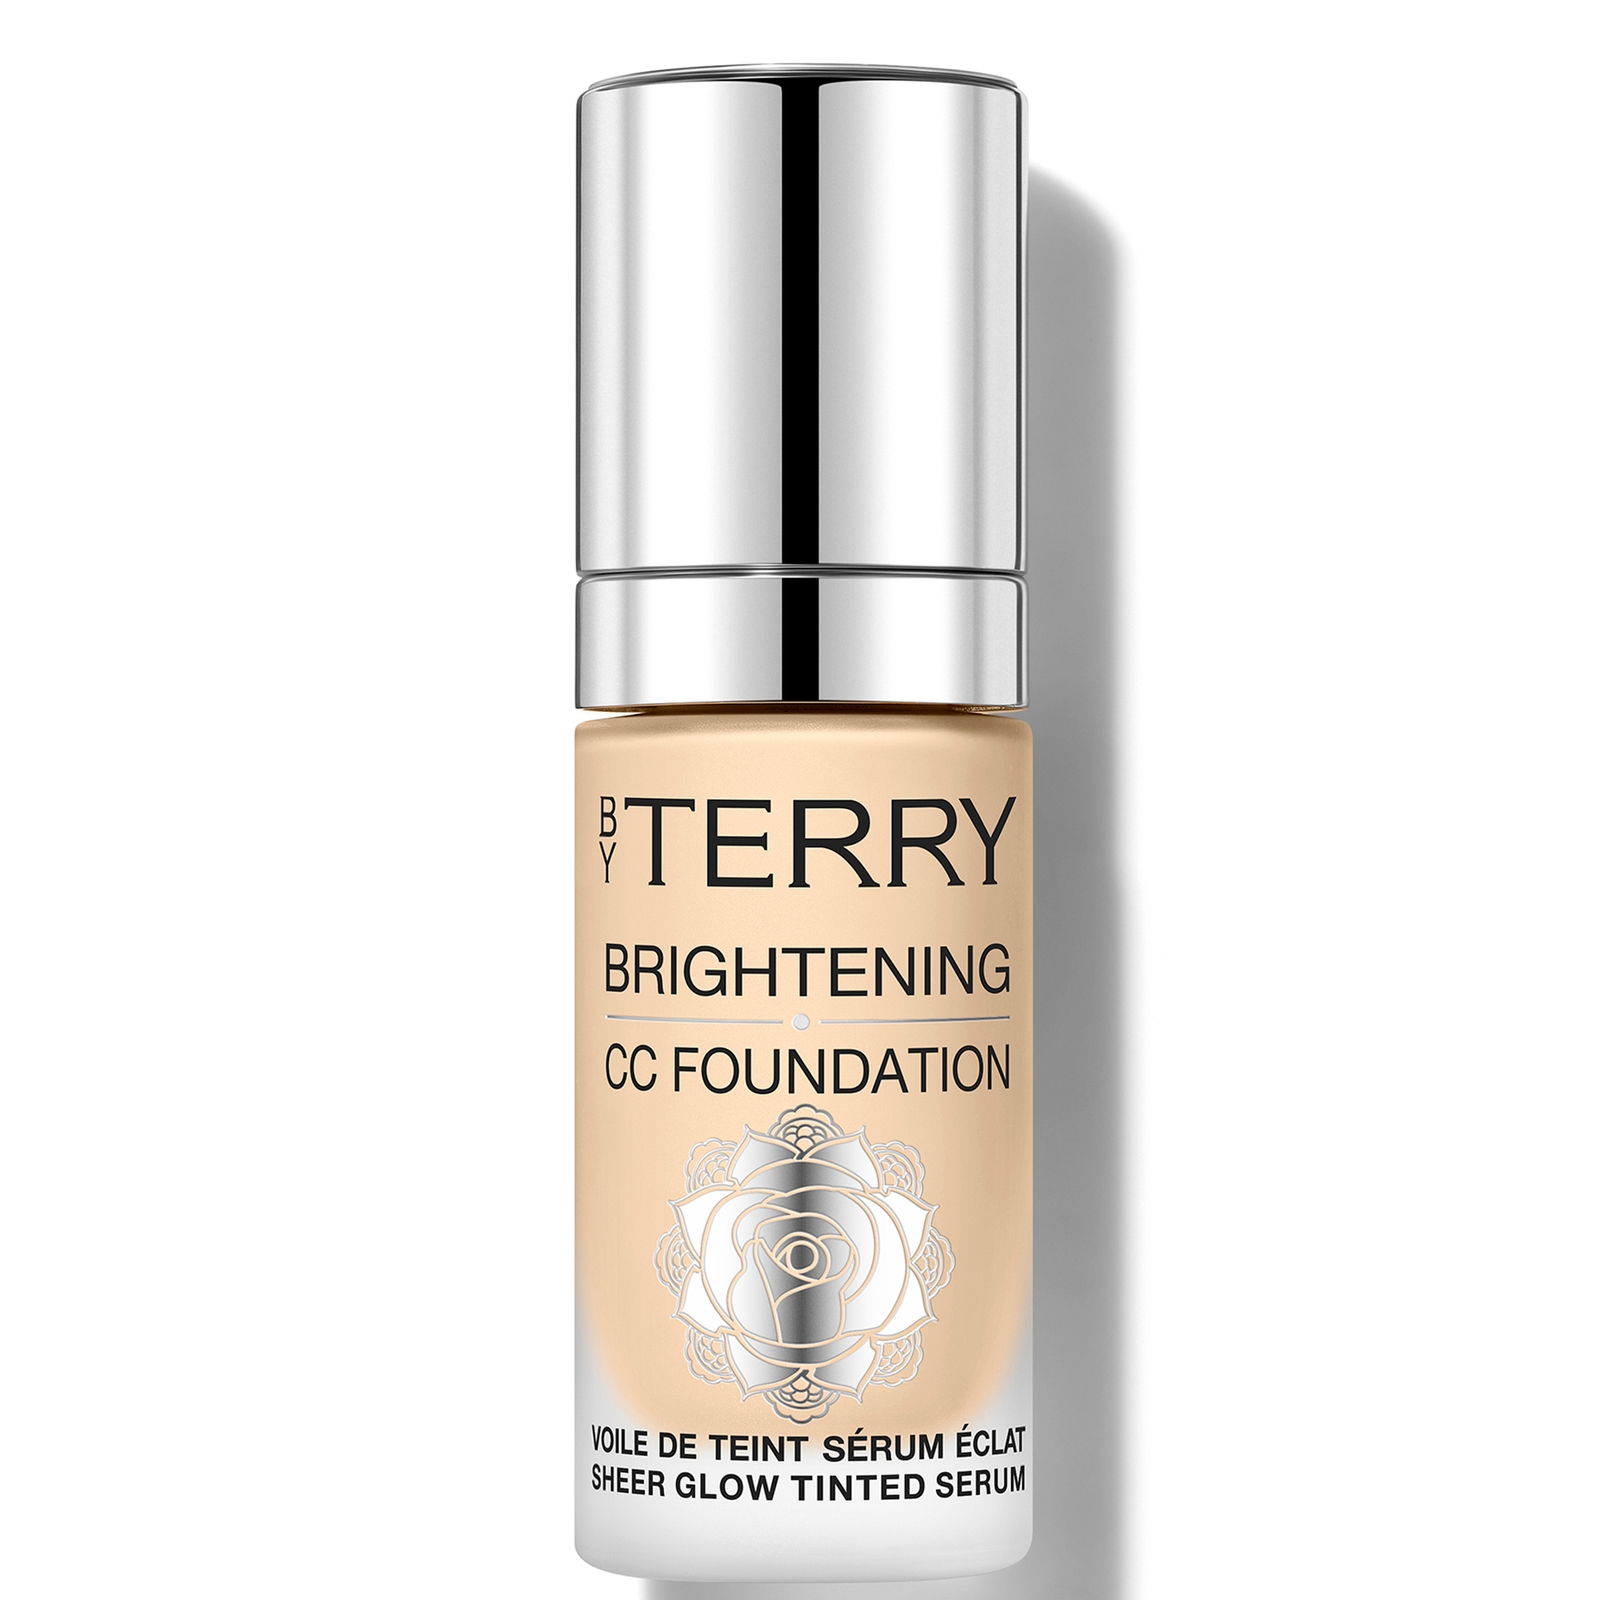 Image of By Terry Brightening CC Foundation 30ml (Various Shades) - 2W - LIGHT WARM